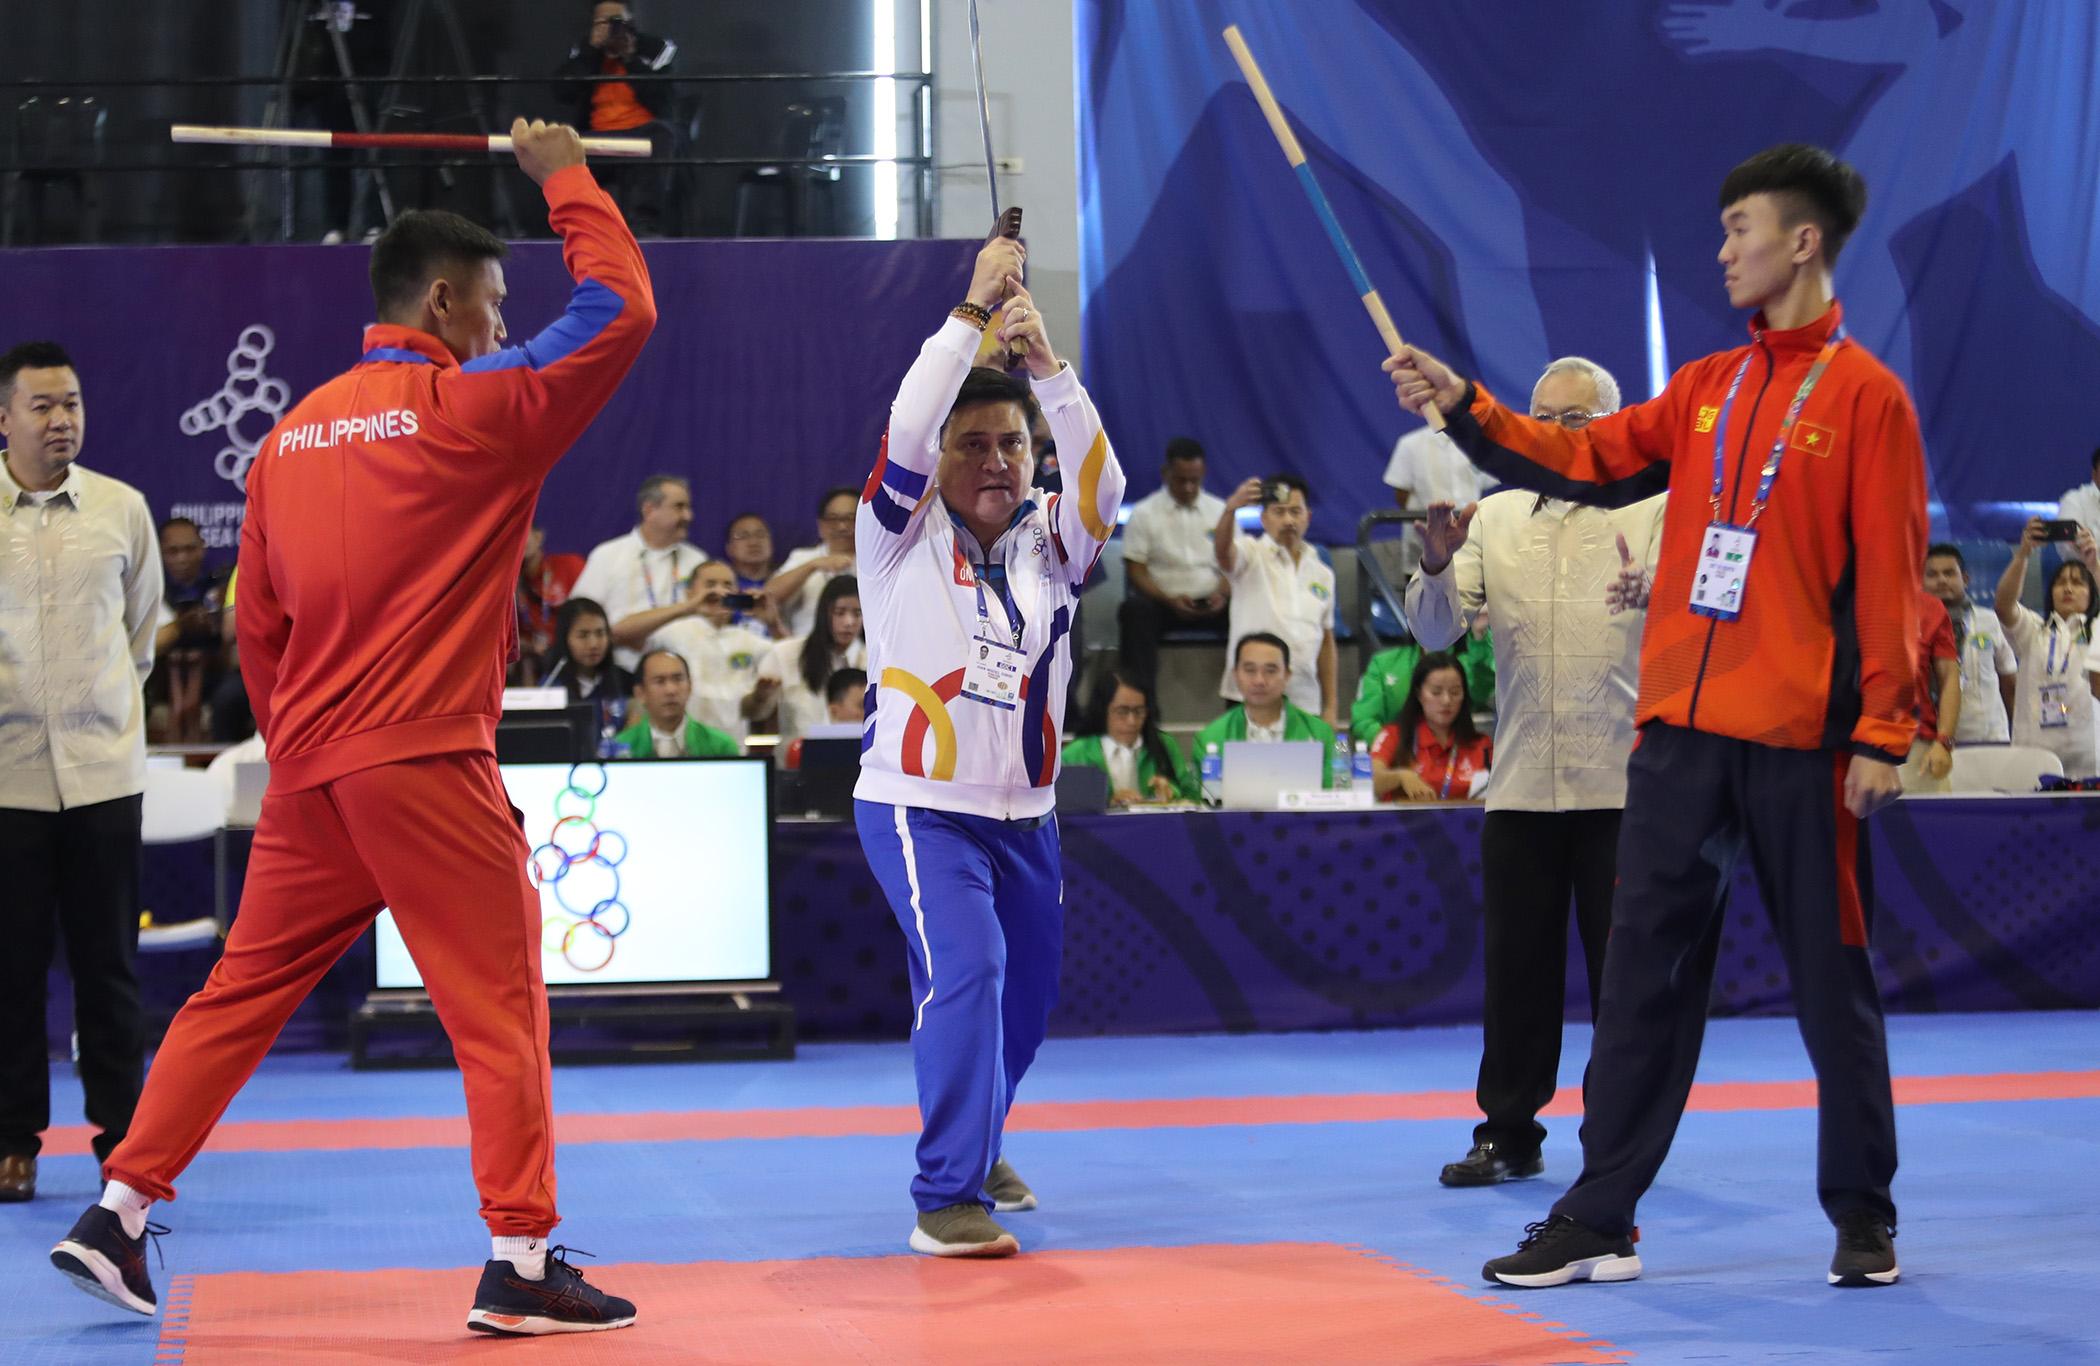 Team Philippines opens the arnis competition at SEA Games 2019